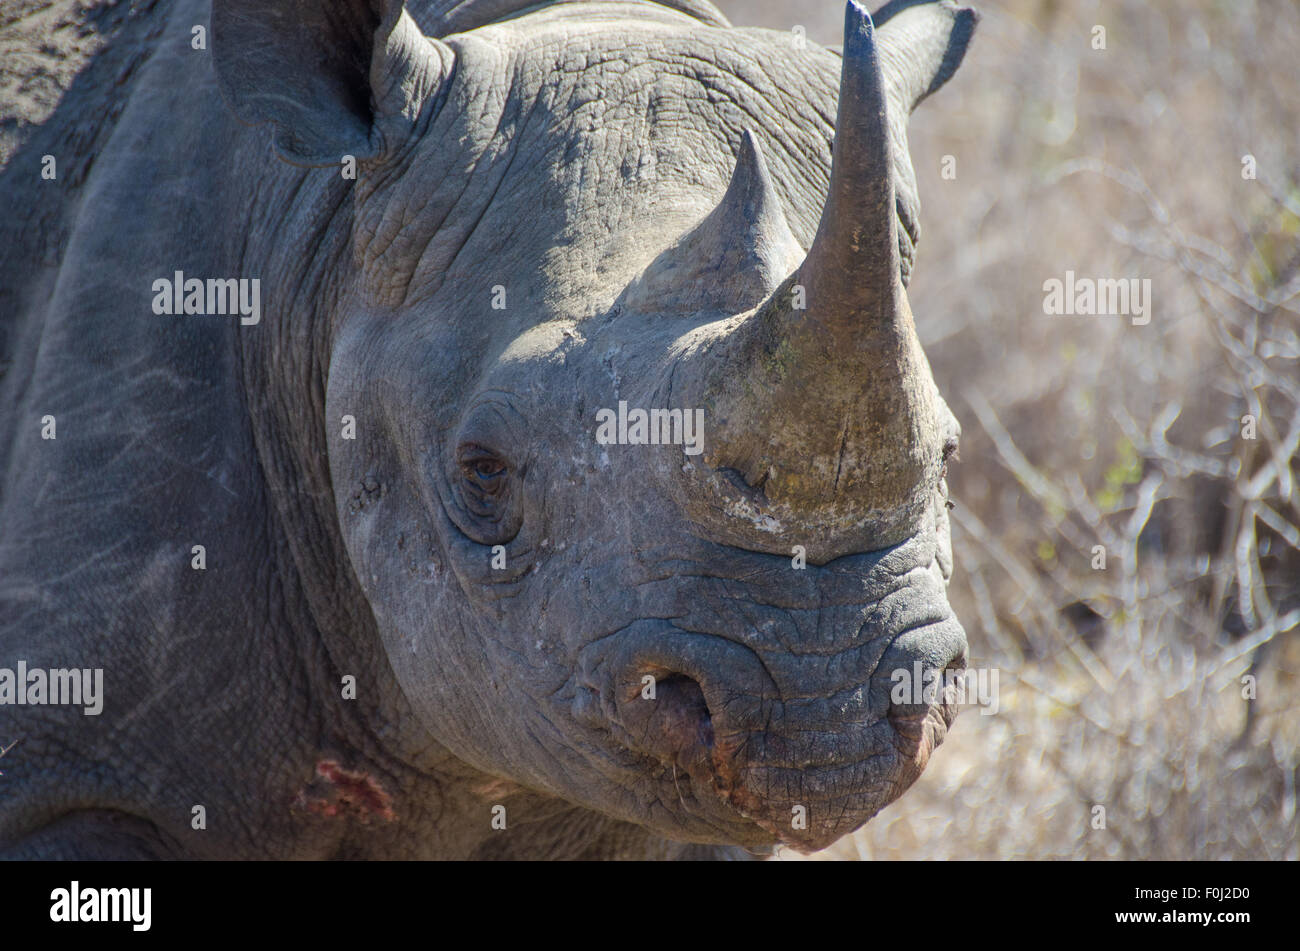 The elusive and critically endangered black rhinoceros roams through the Mkhaya Game Reserve in Swaziland. Stock Photo